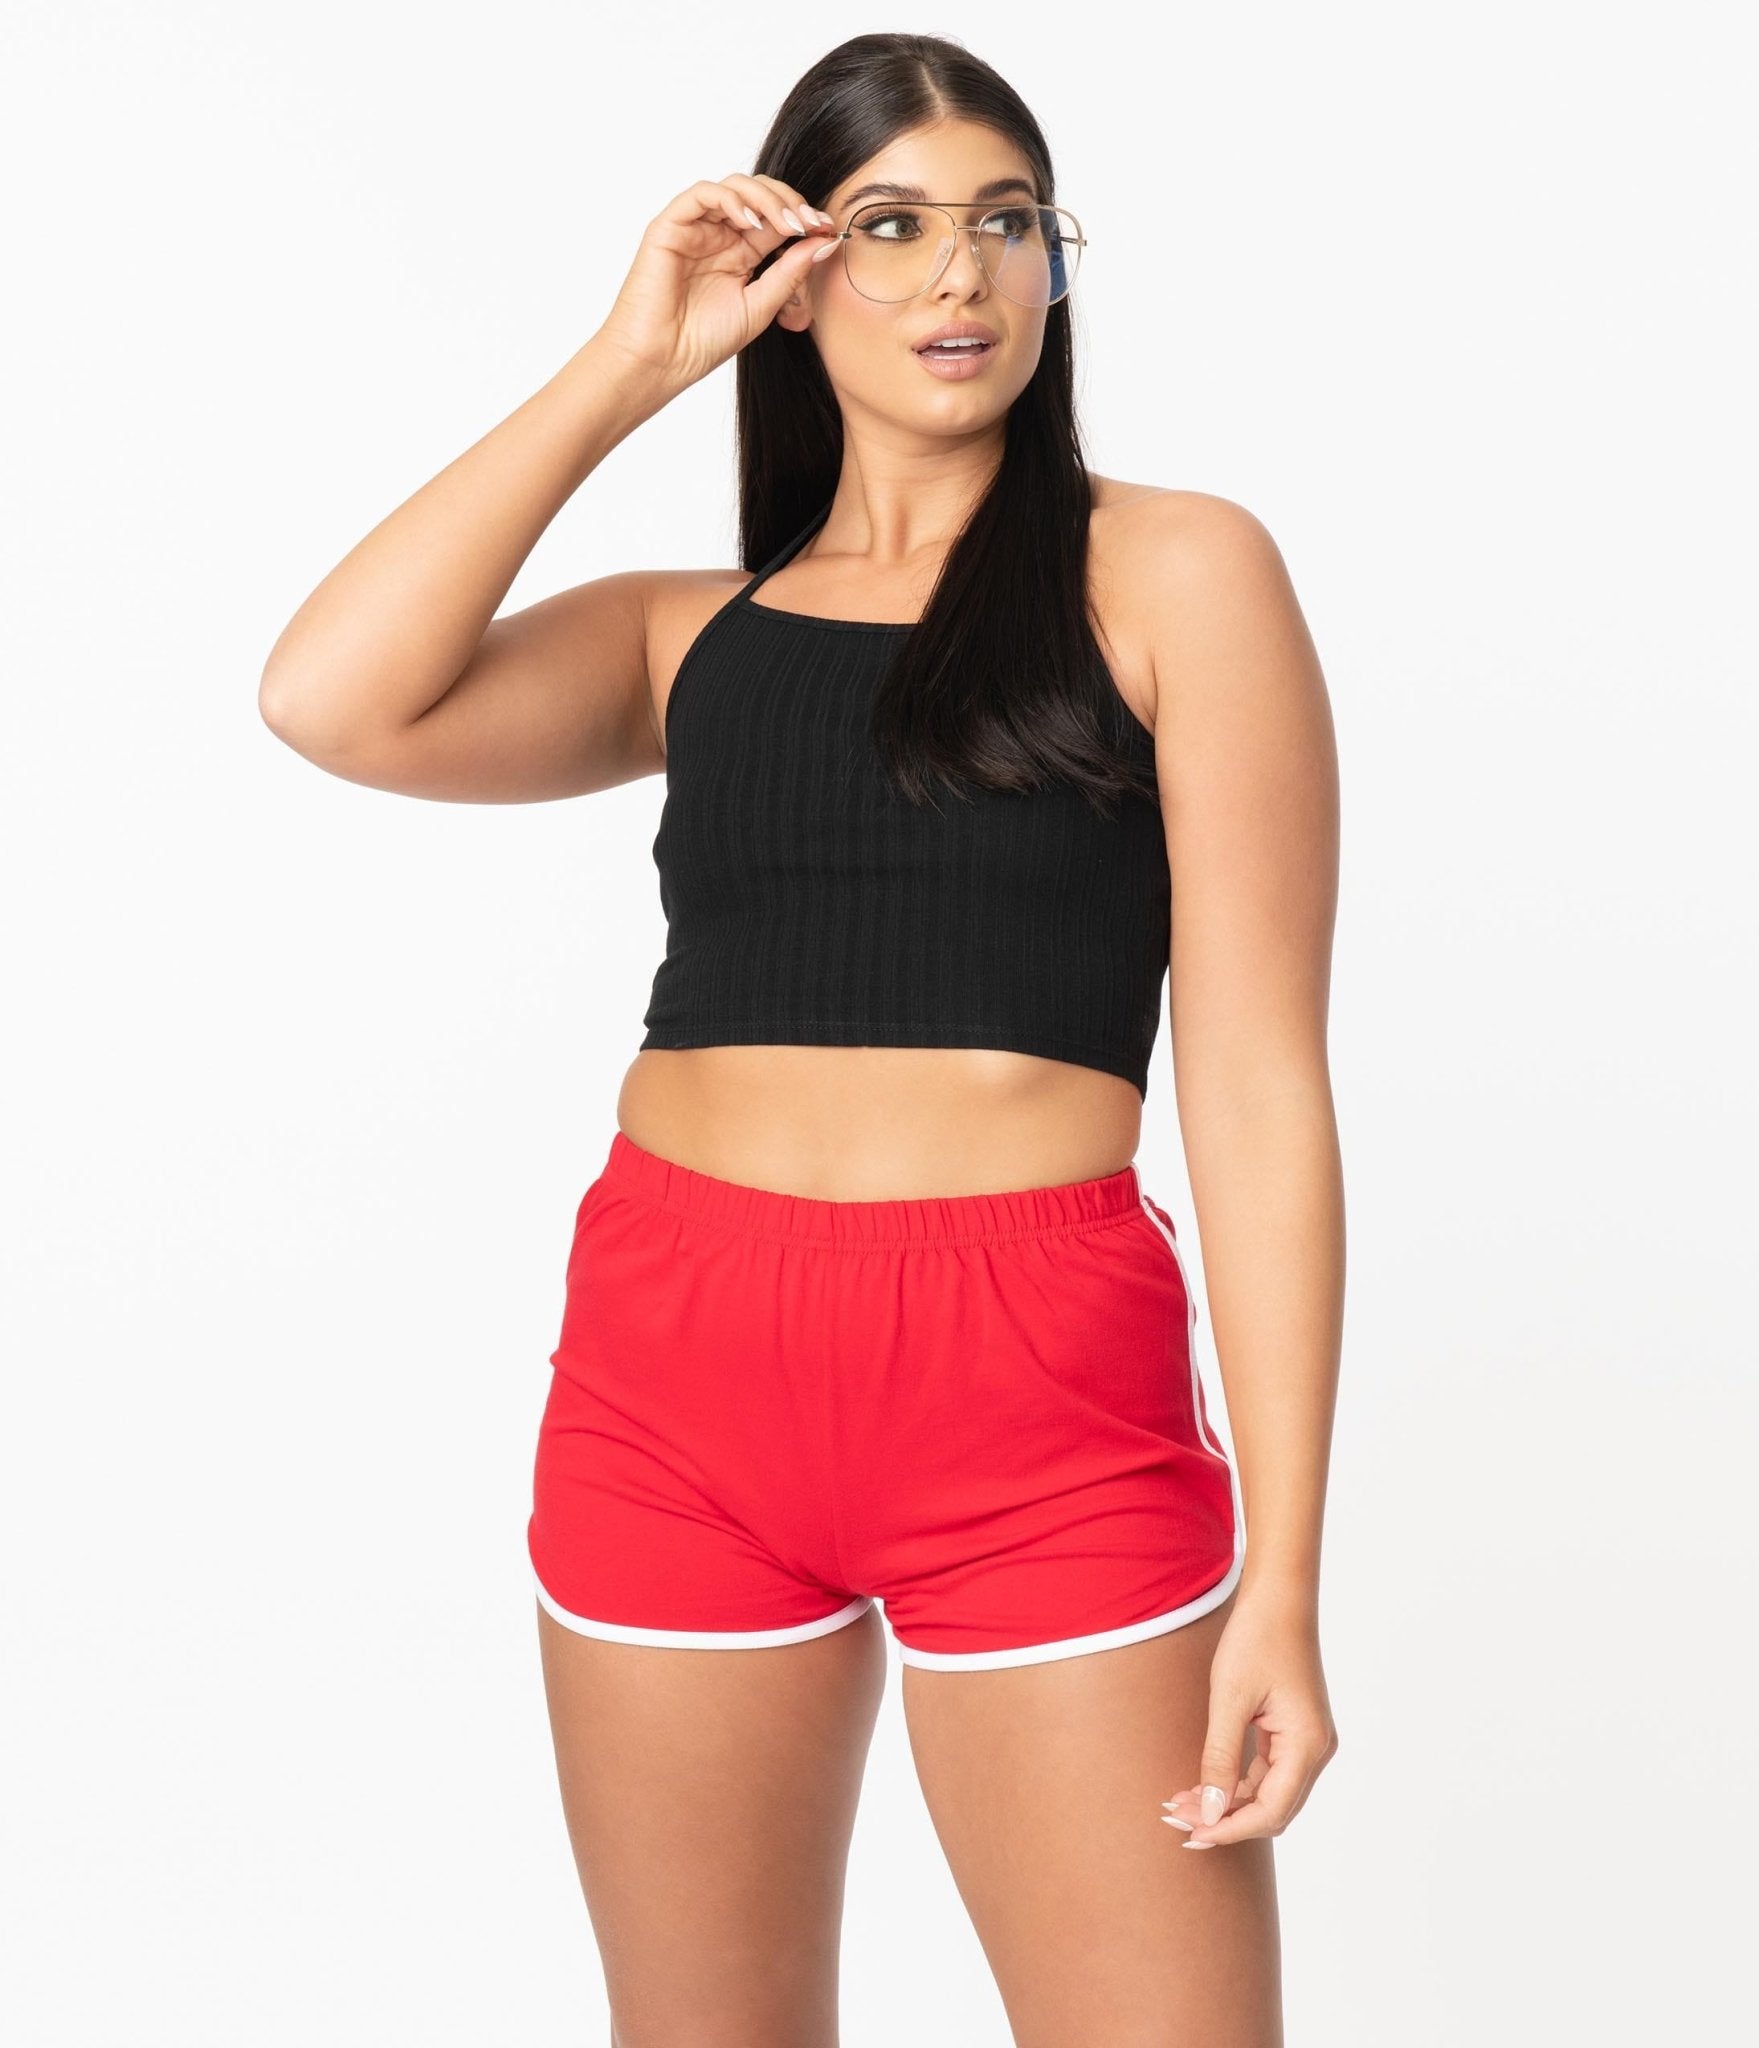 Emerson Dolphin Shorts - Red  Dolphin shorts outfit, Dolphin